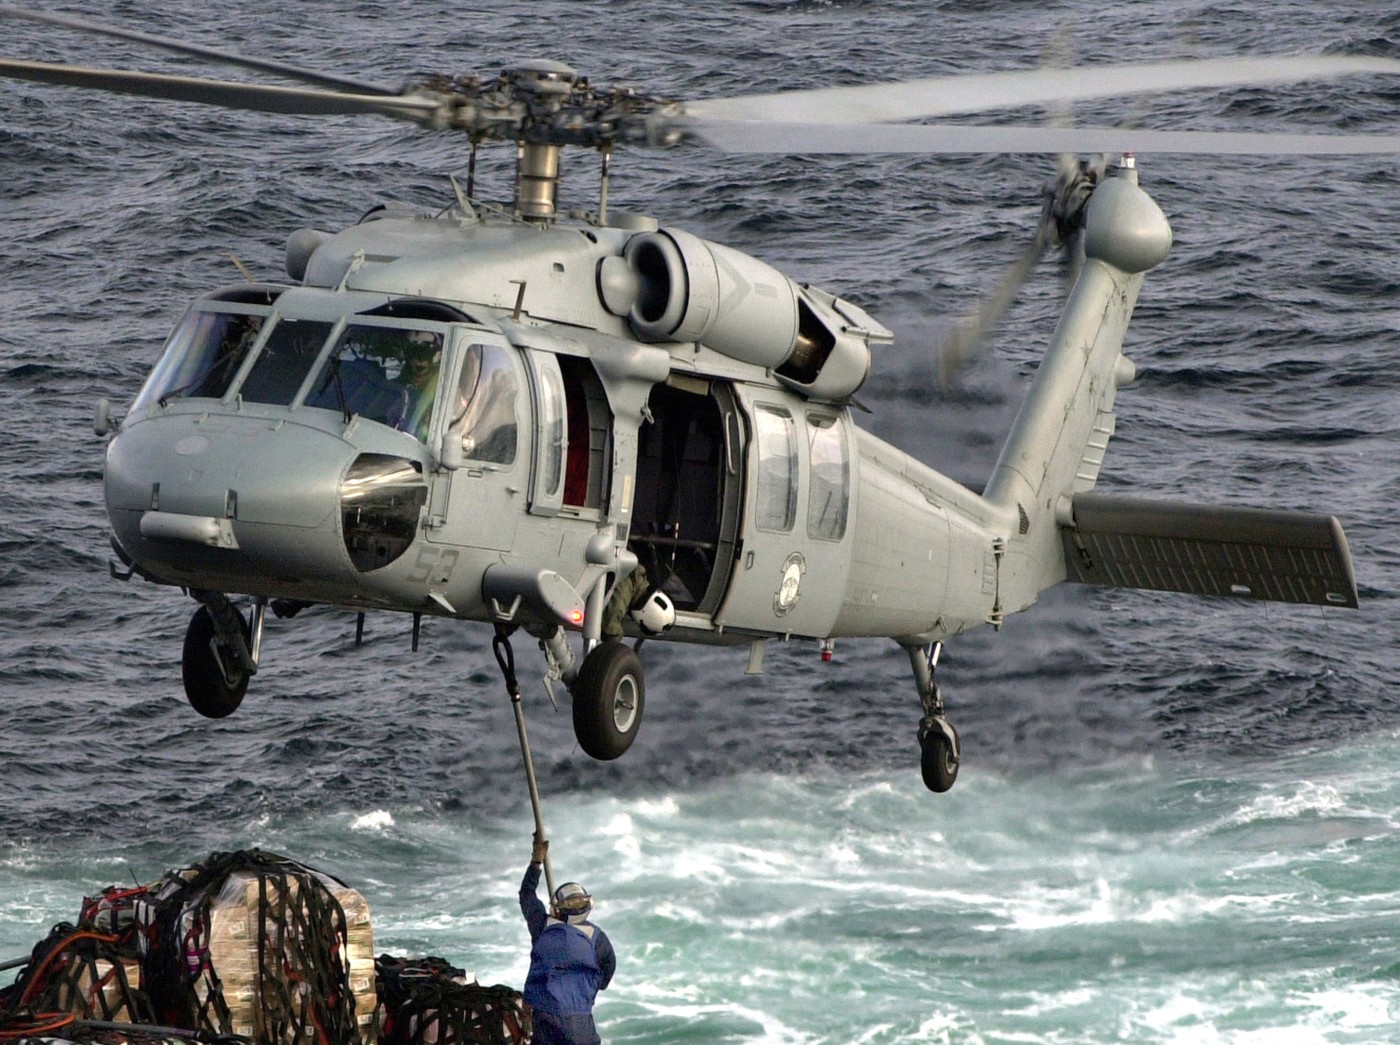 hc-5 providers helicopter combat support squadron navy mh-60s seahawk 31